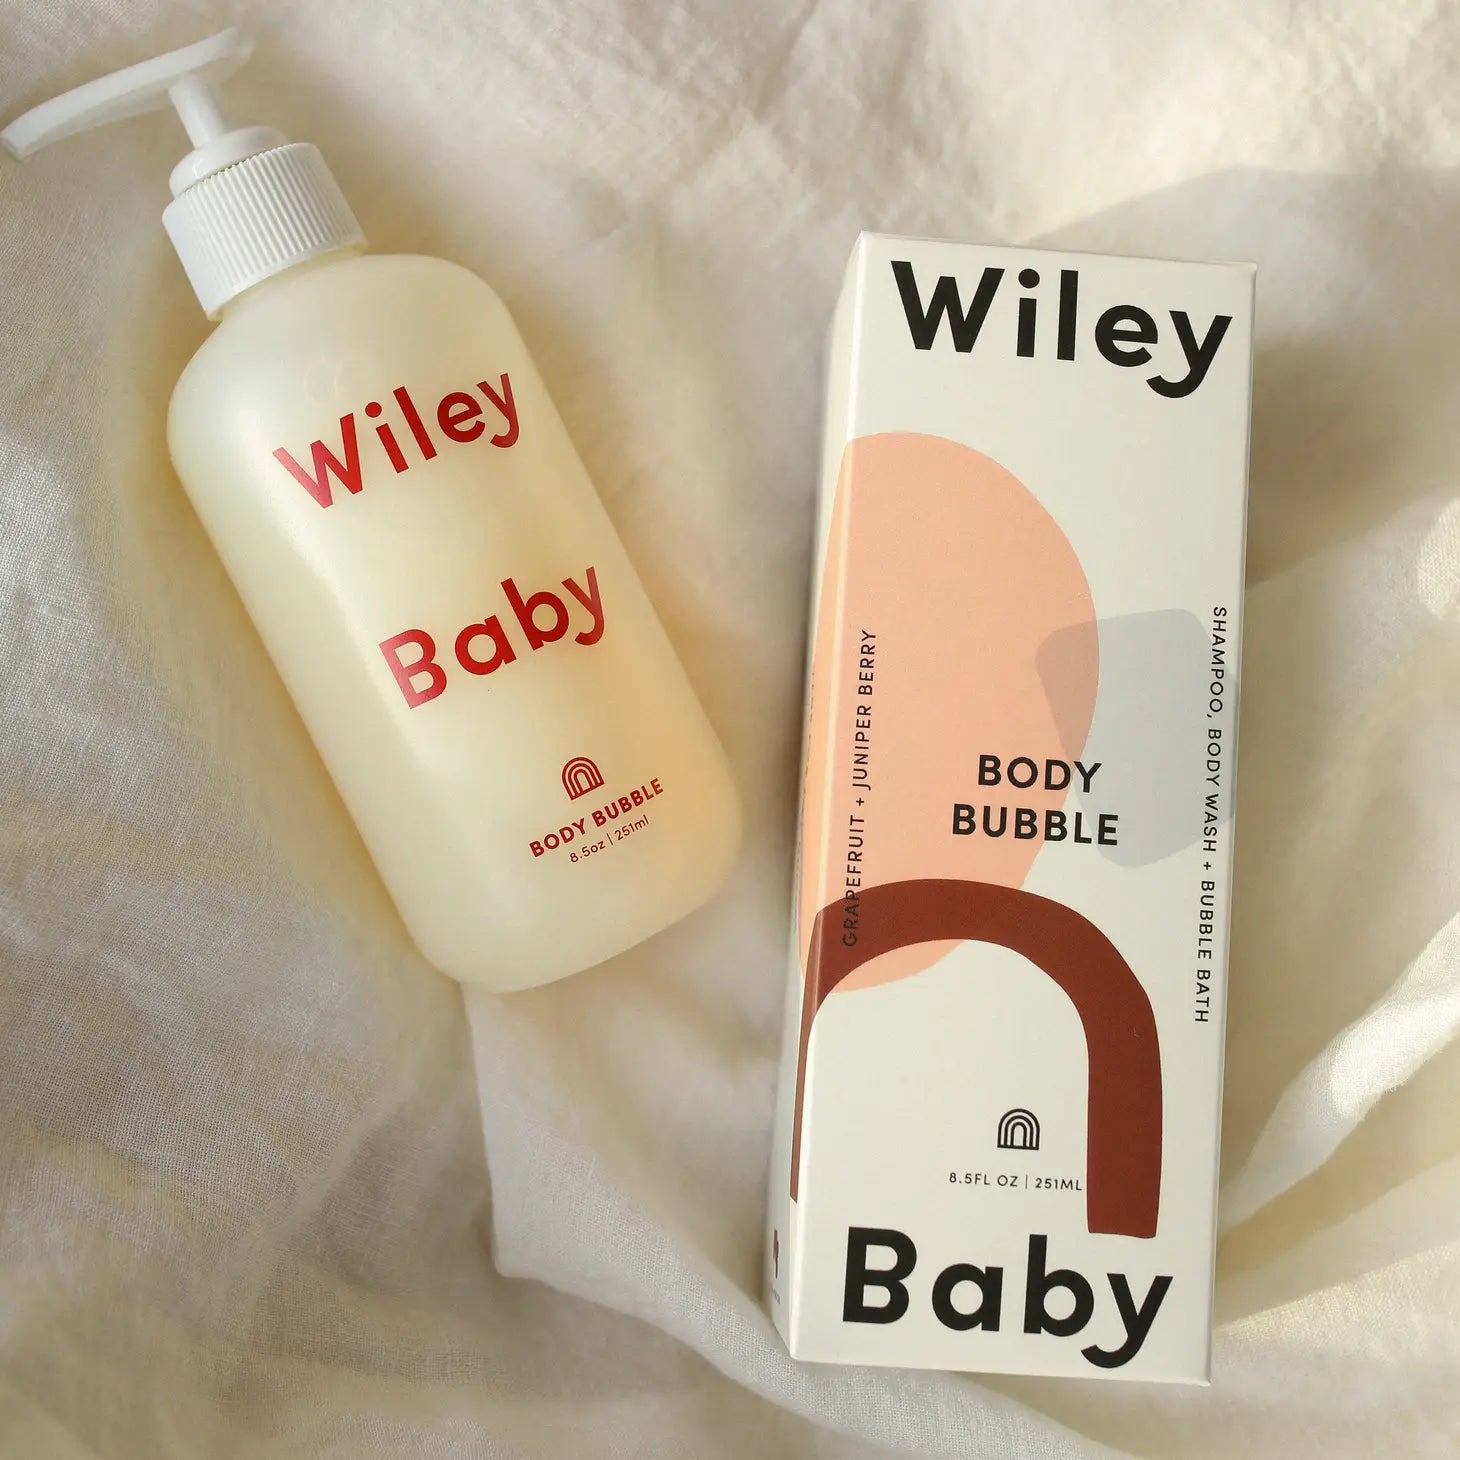 Body Bubble | Wiley Baby